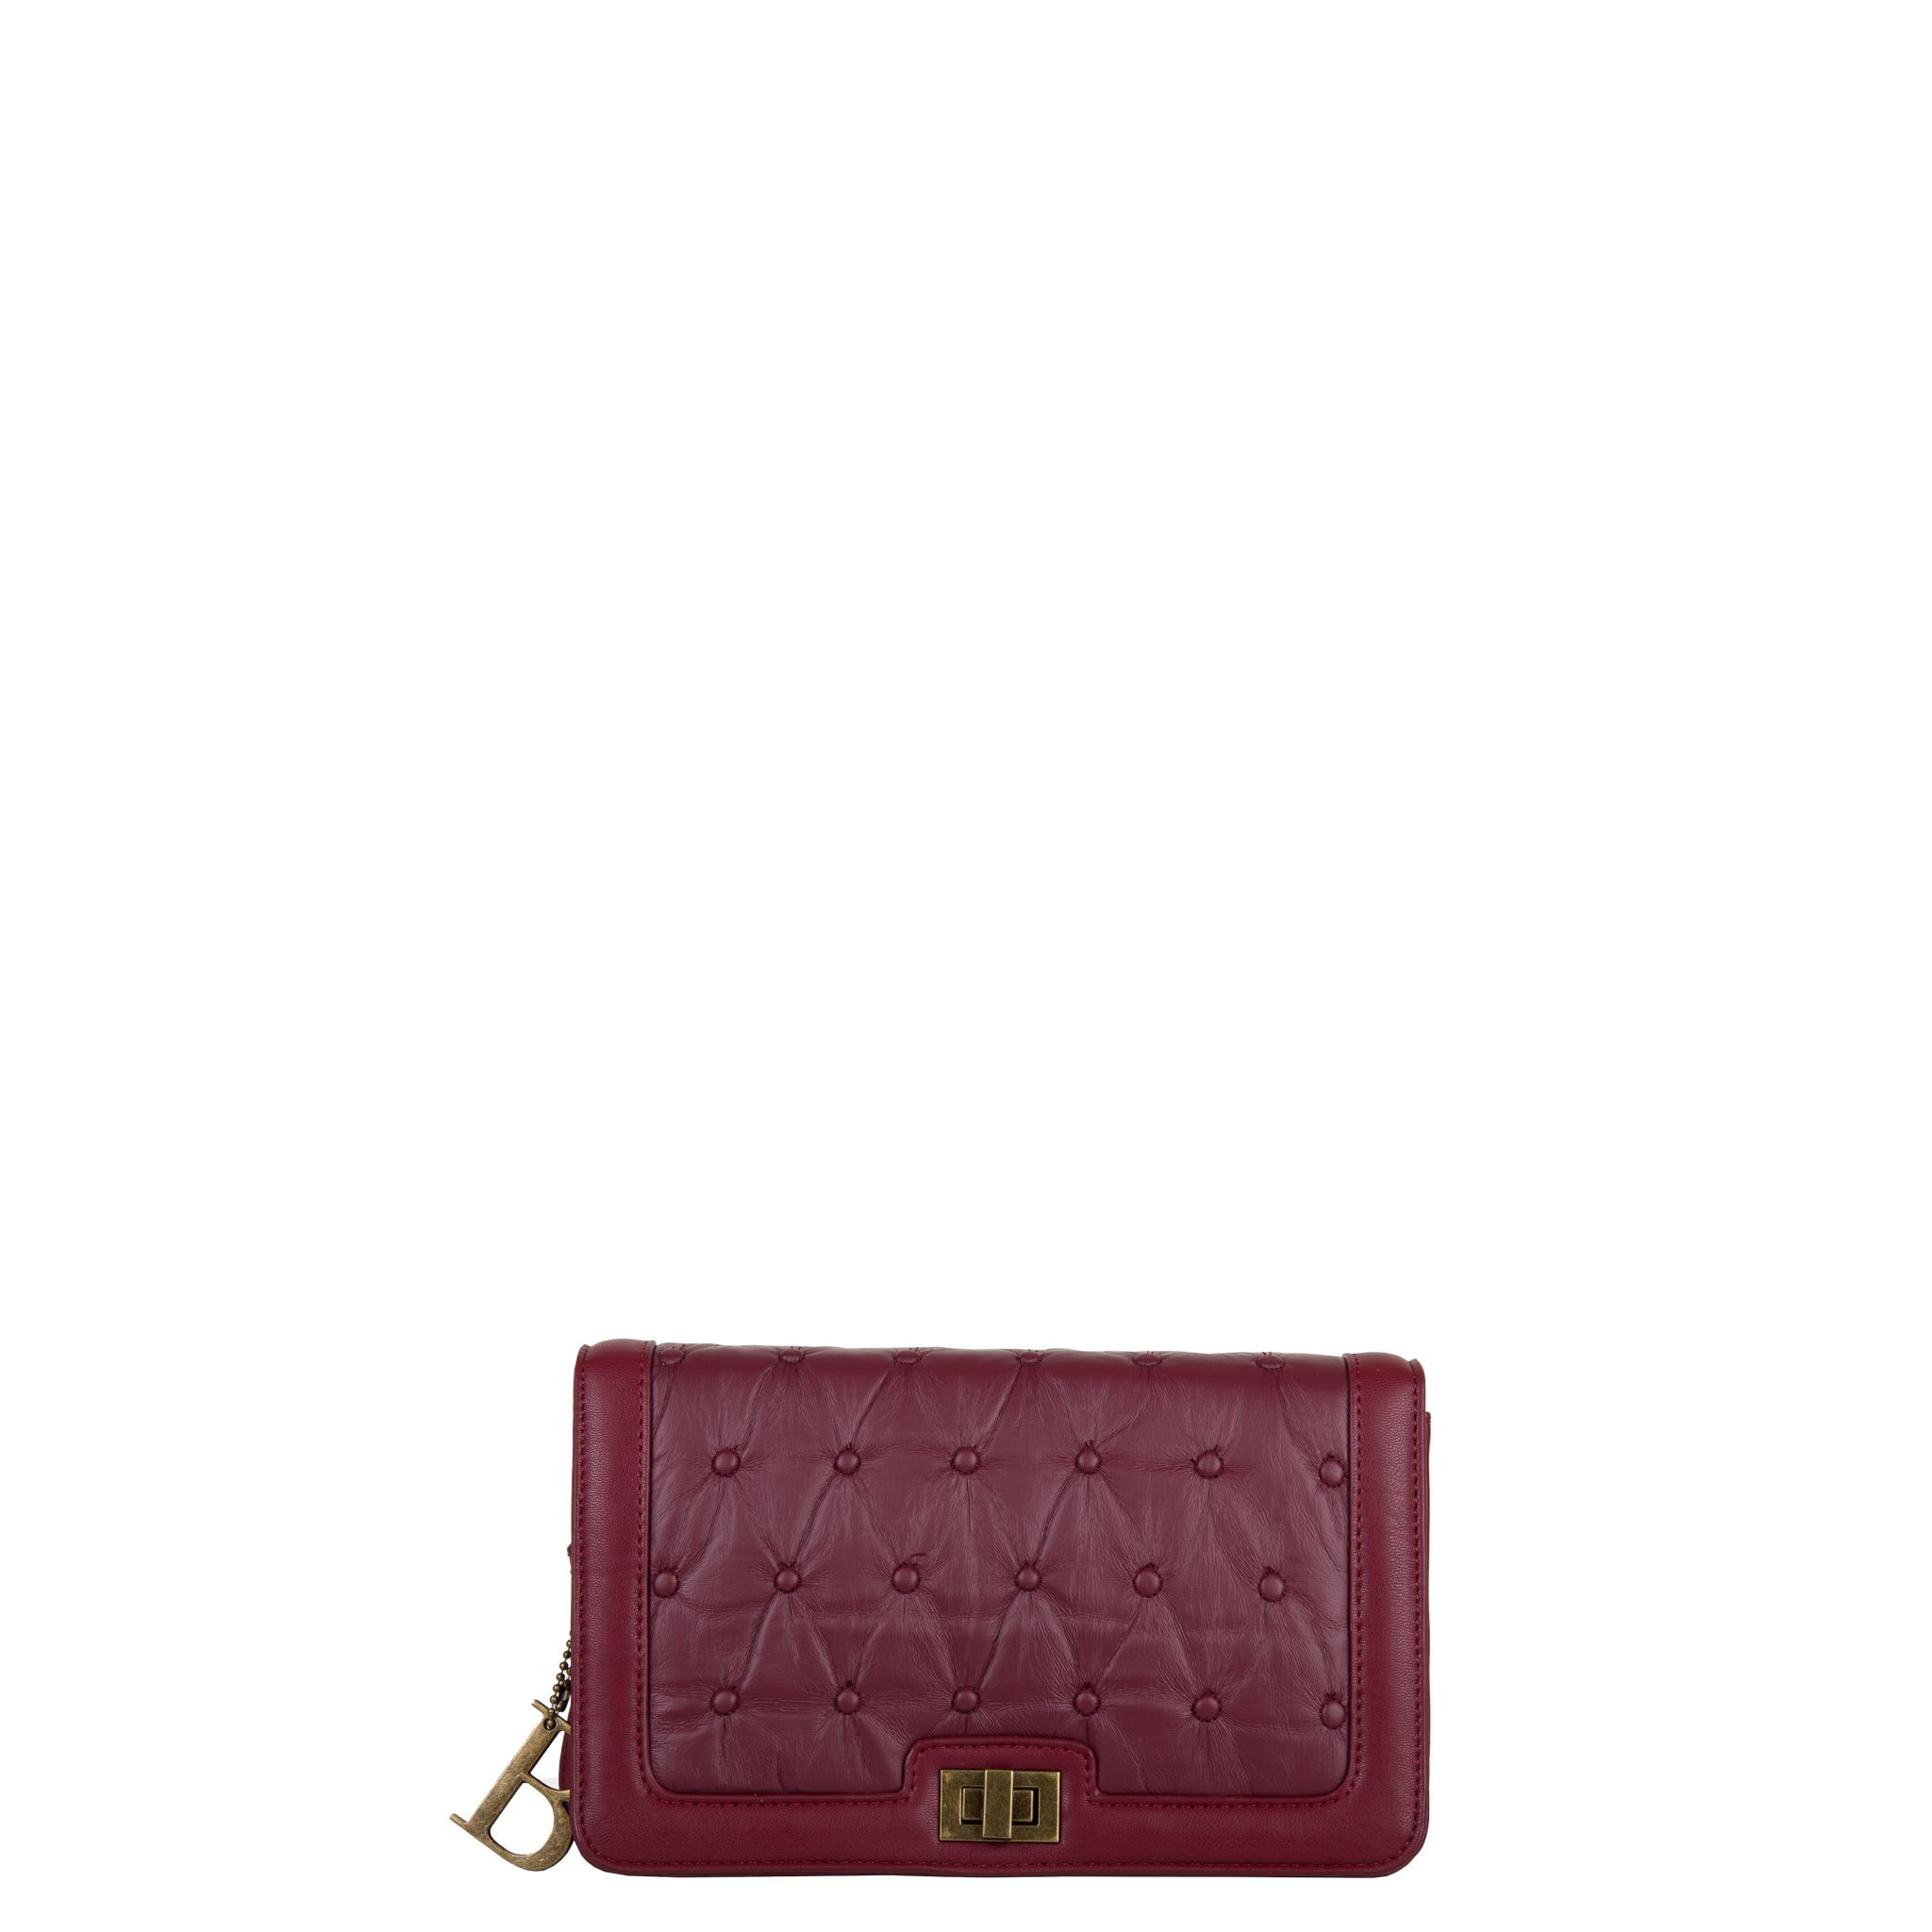 Hand bag Red